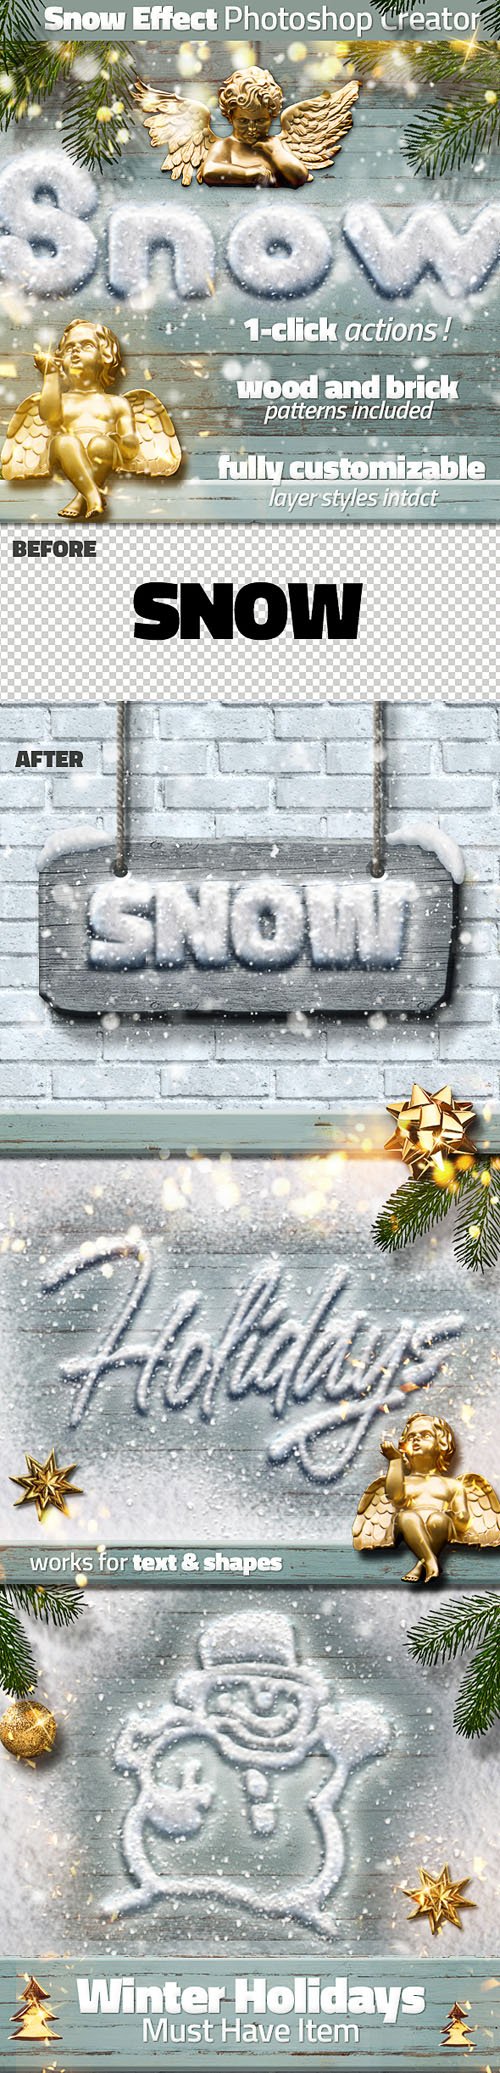 Snow Effect Photoshop Creater - Actions, Brushes & Patterns